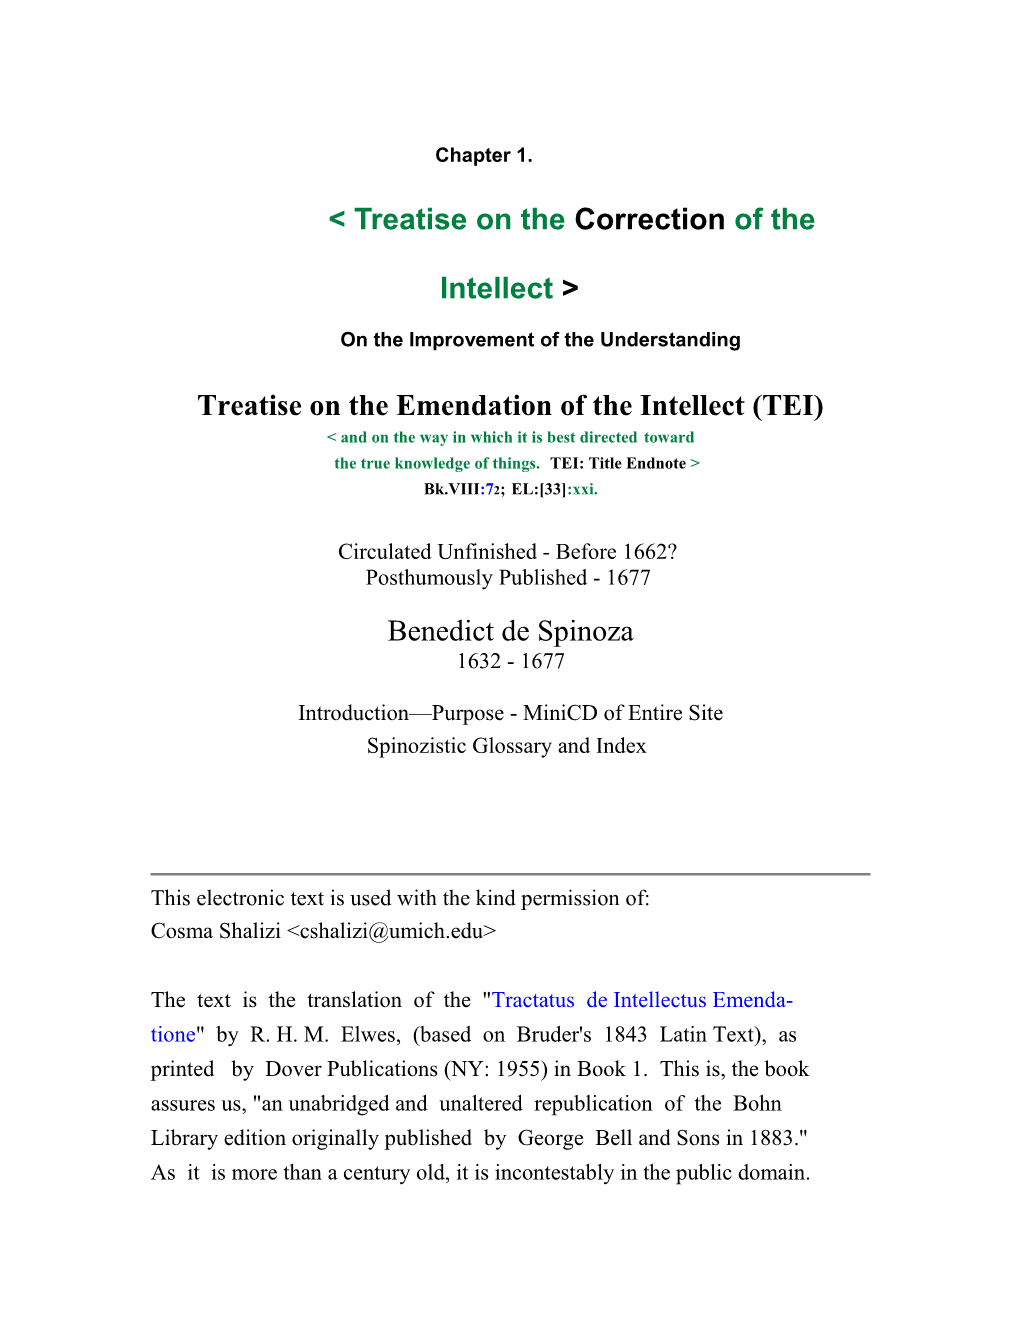 Chapter 1. &lt; Treatise on the Correction of the Intellect on the Improvement of The